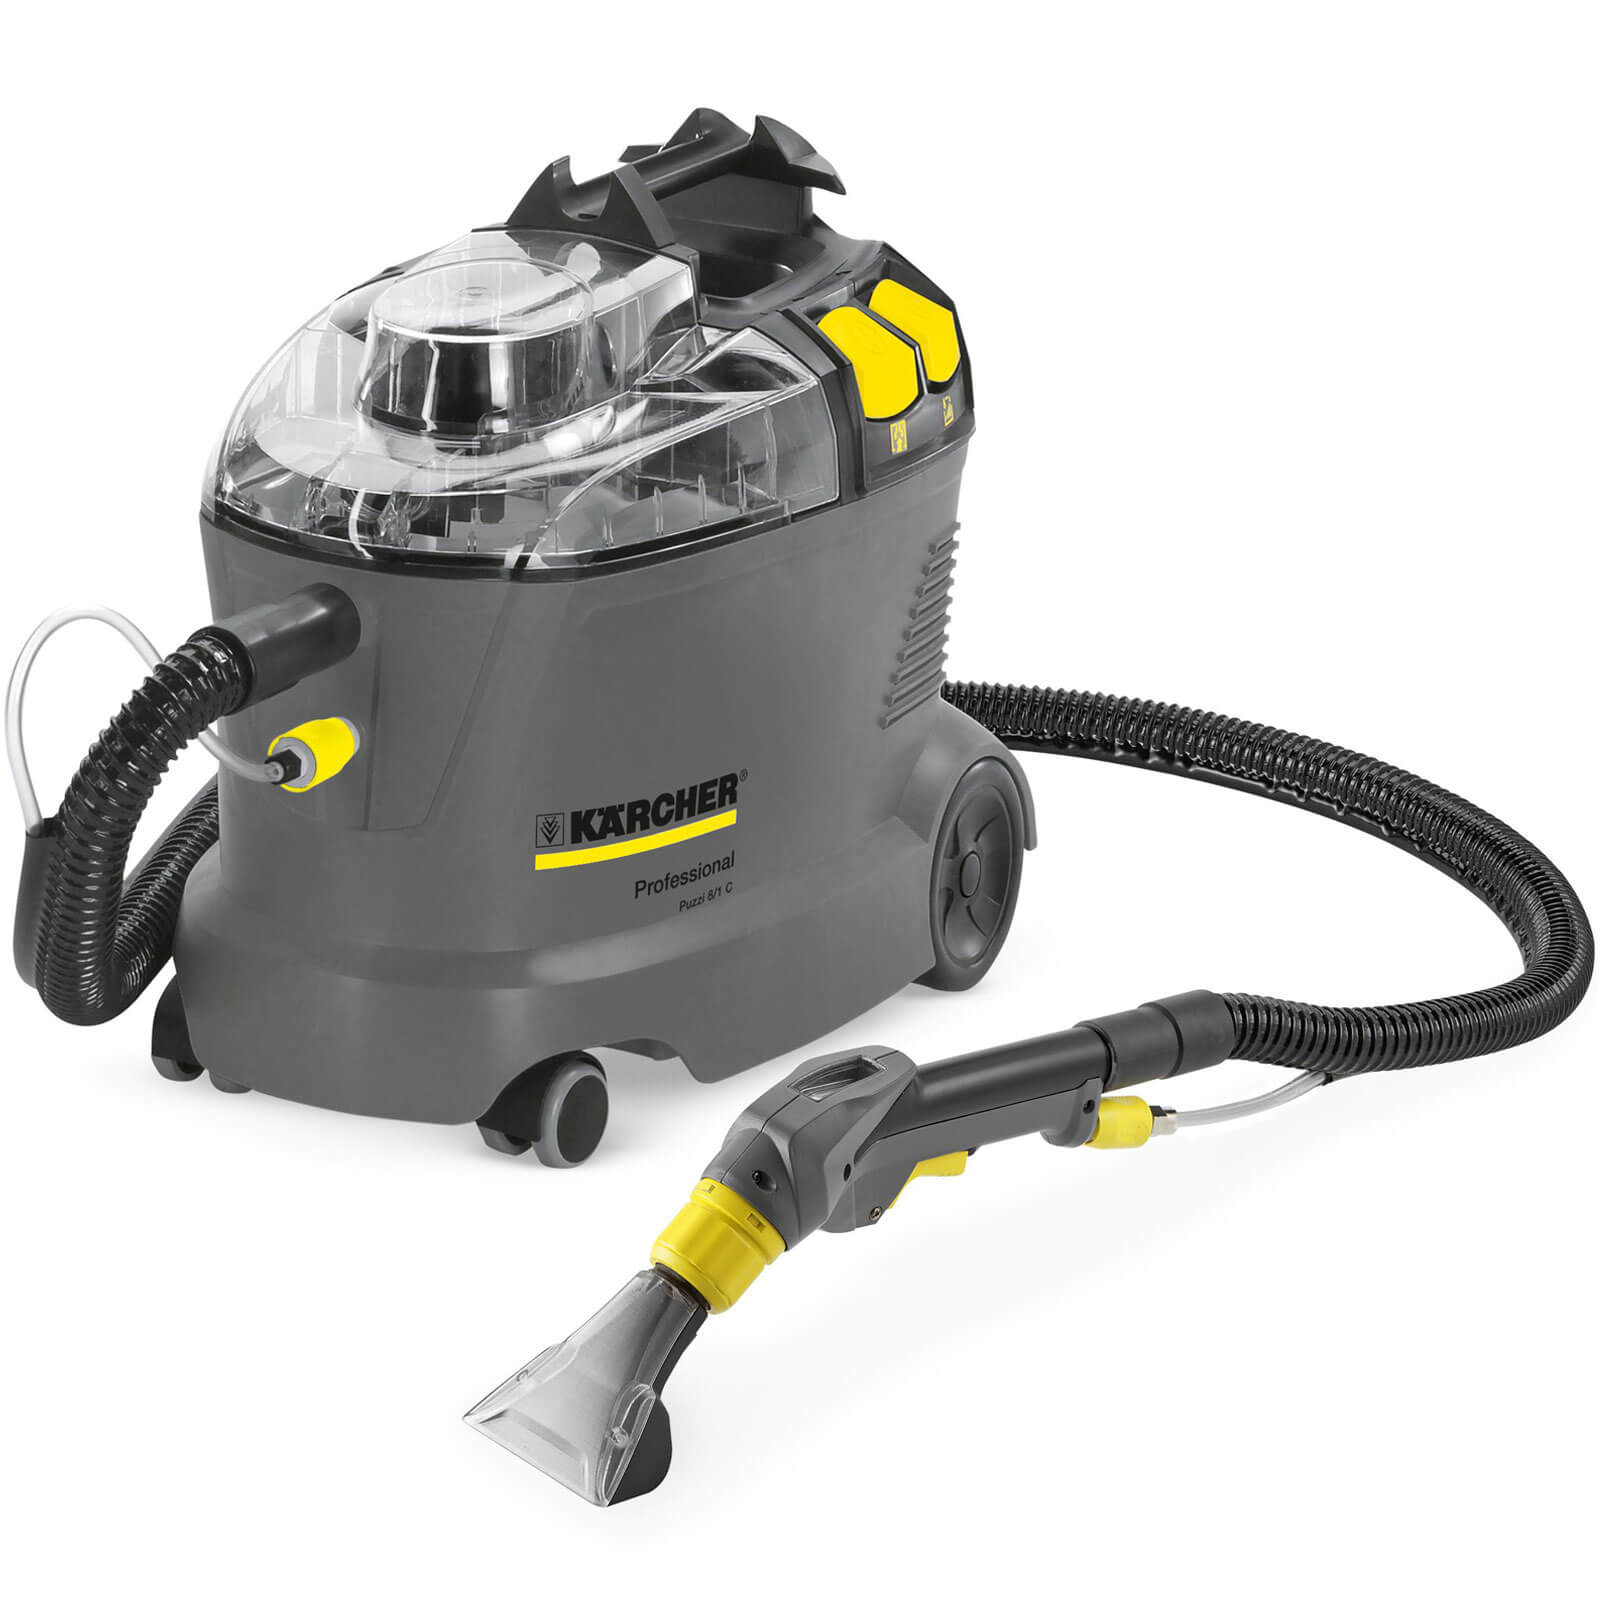 Karcher PUZZI 8/1 C Professional Spot Carpet and Upholstery Cleaner 240v